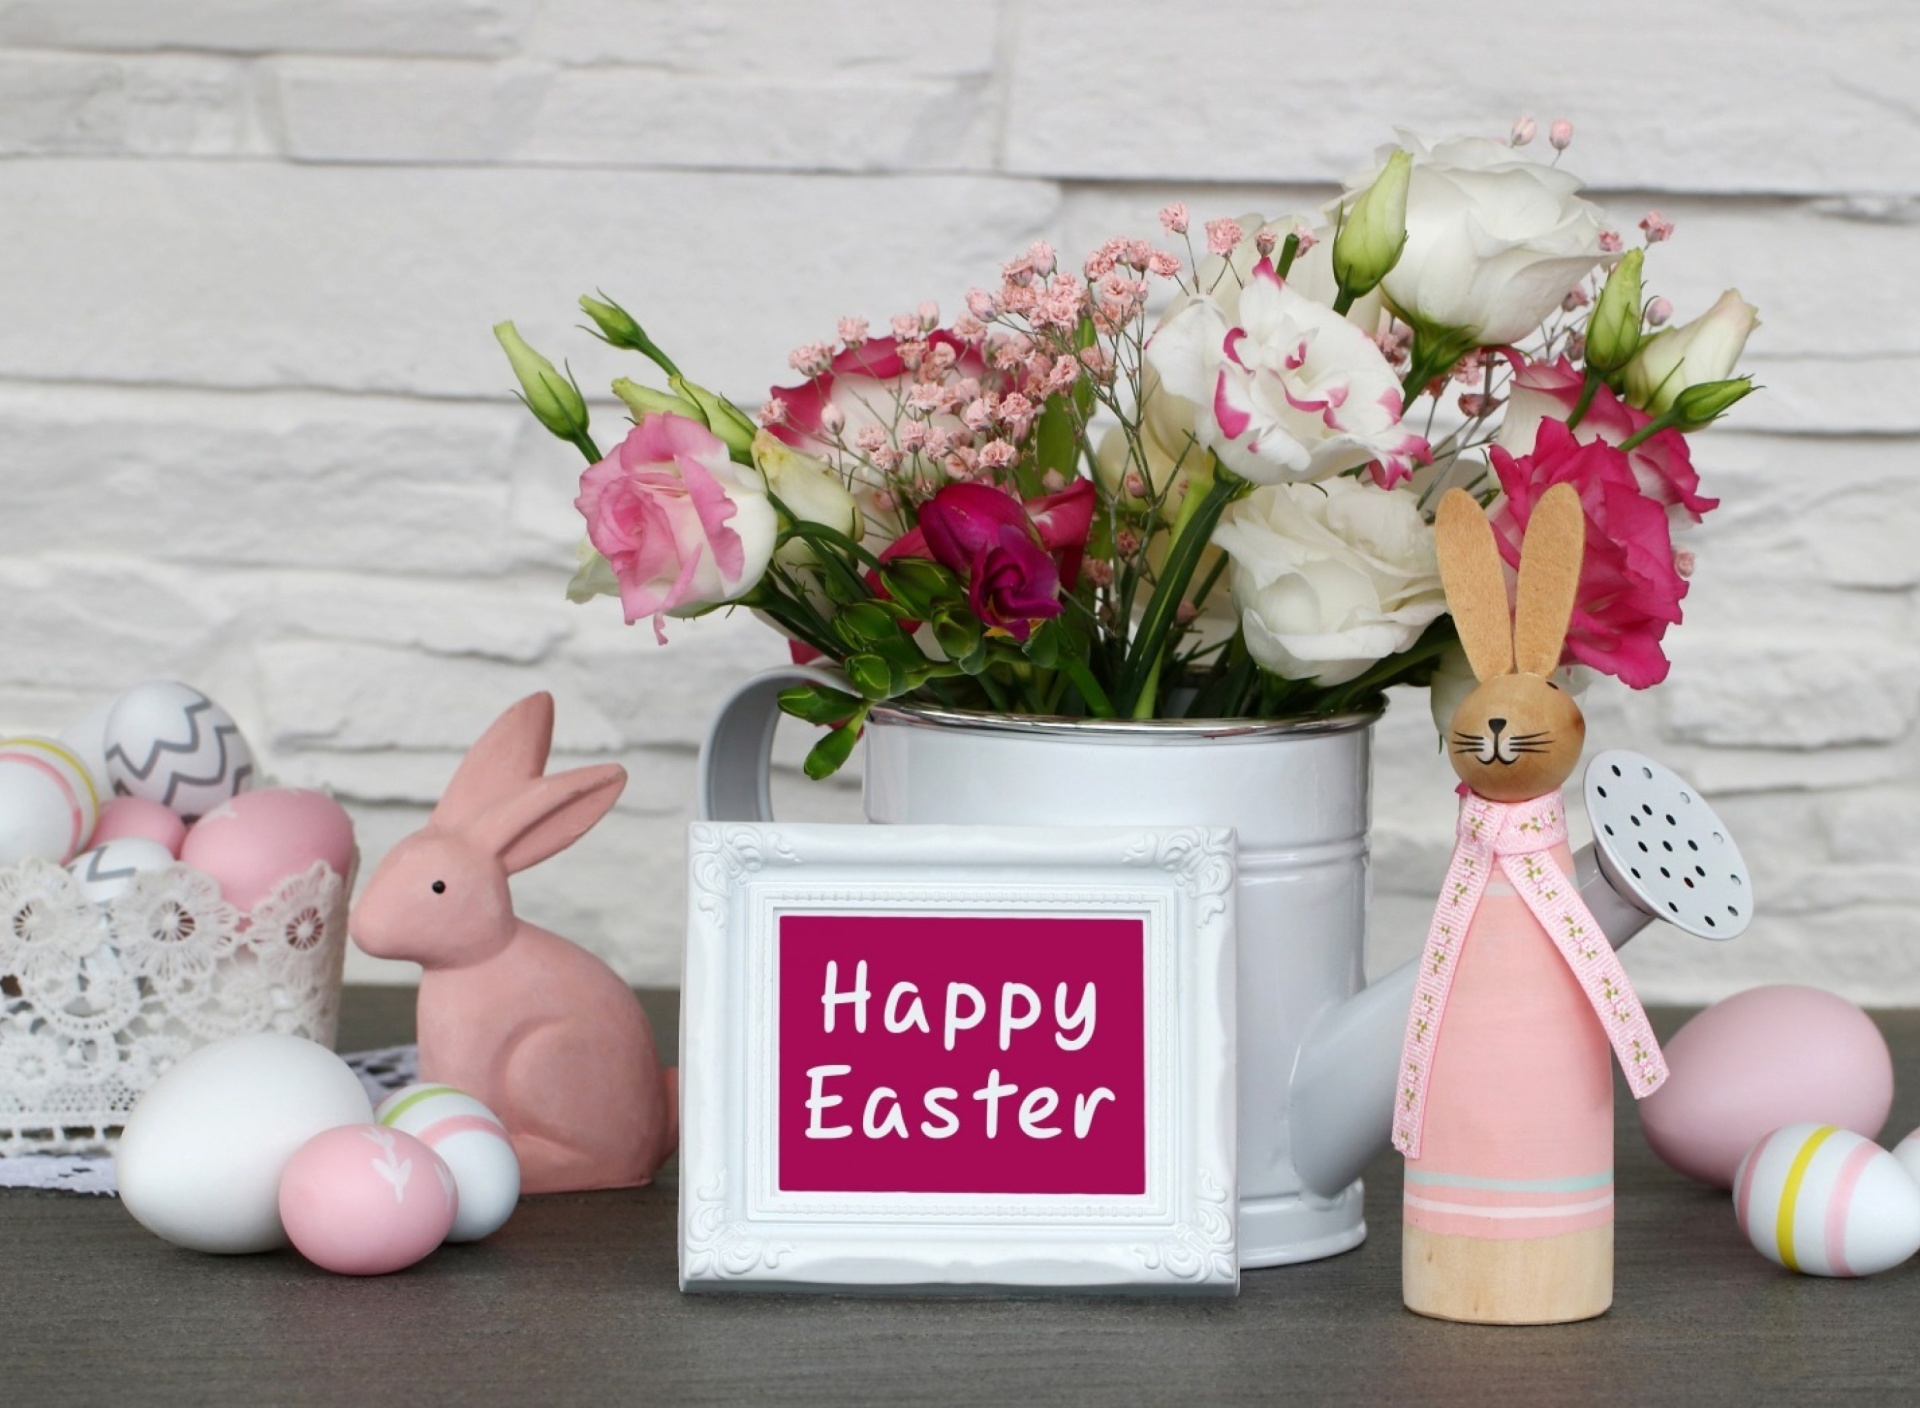 Happy Easter with Hare Figures screenshot #1 1920x1408